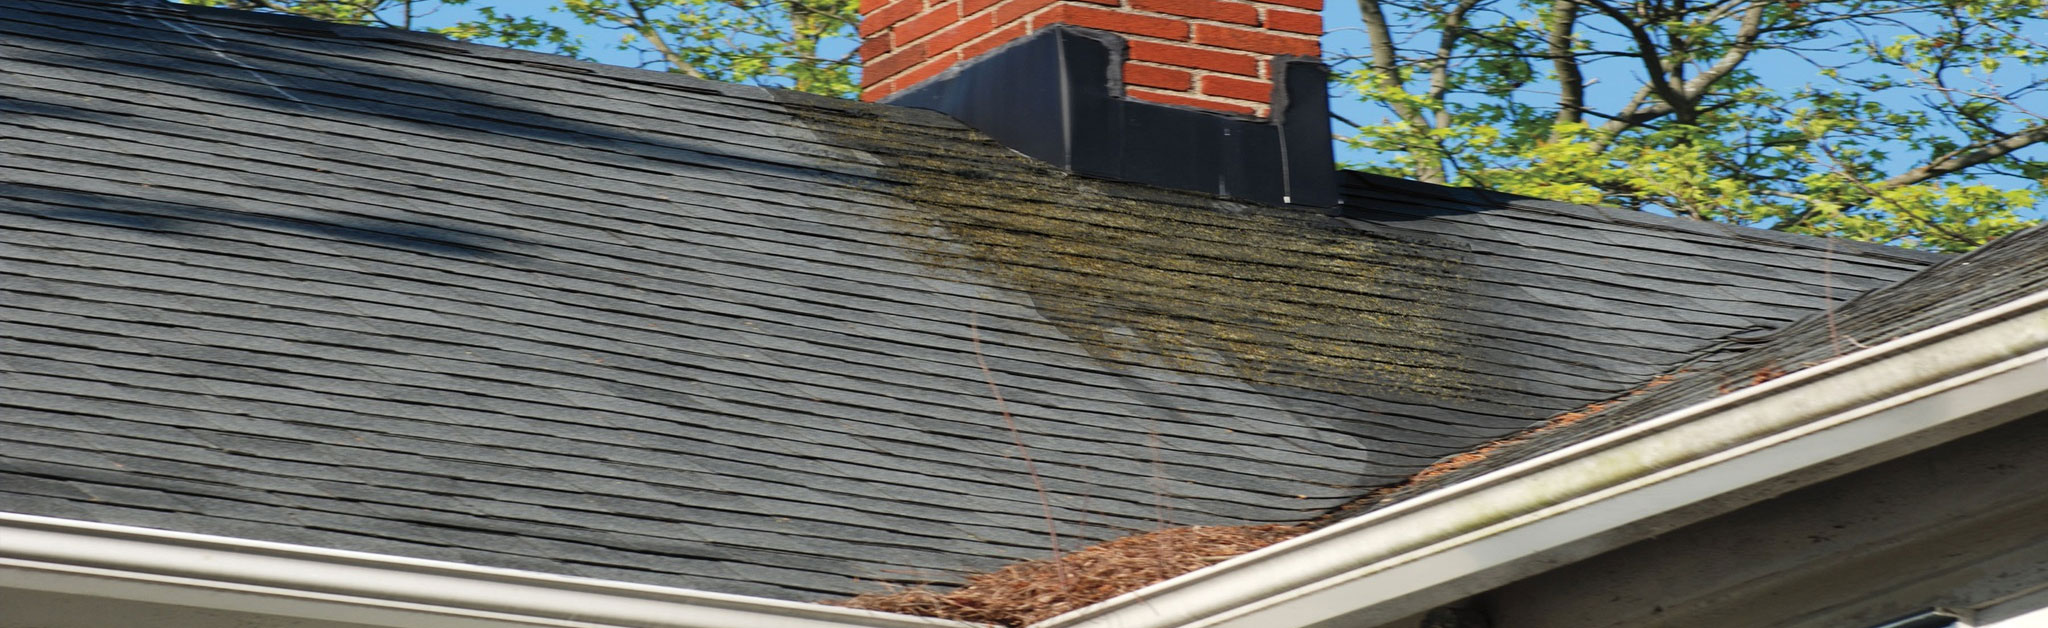 Brothers Roofing Images